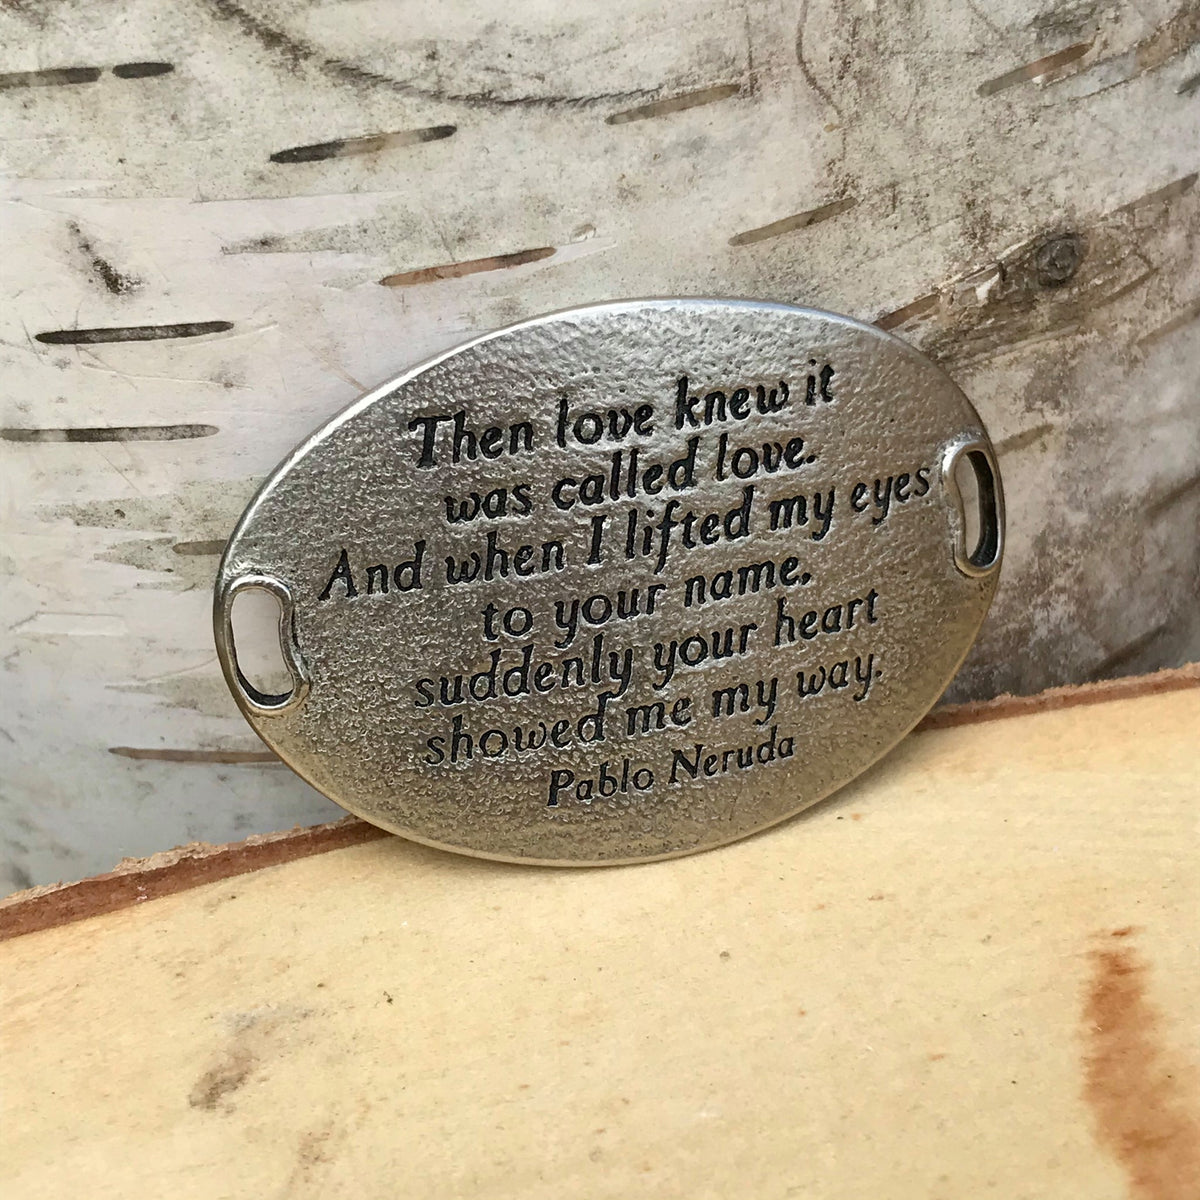 Oval shaped, antique silver finish Lenny & Eva bracelet sentiment that reads, "Then love knew it was called love. And when I lifted my eyes to your name, suddenly your heart showed me my way." Quote by Pablo Neruda.